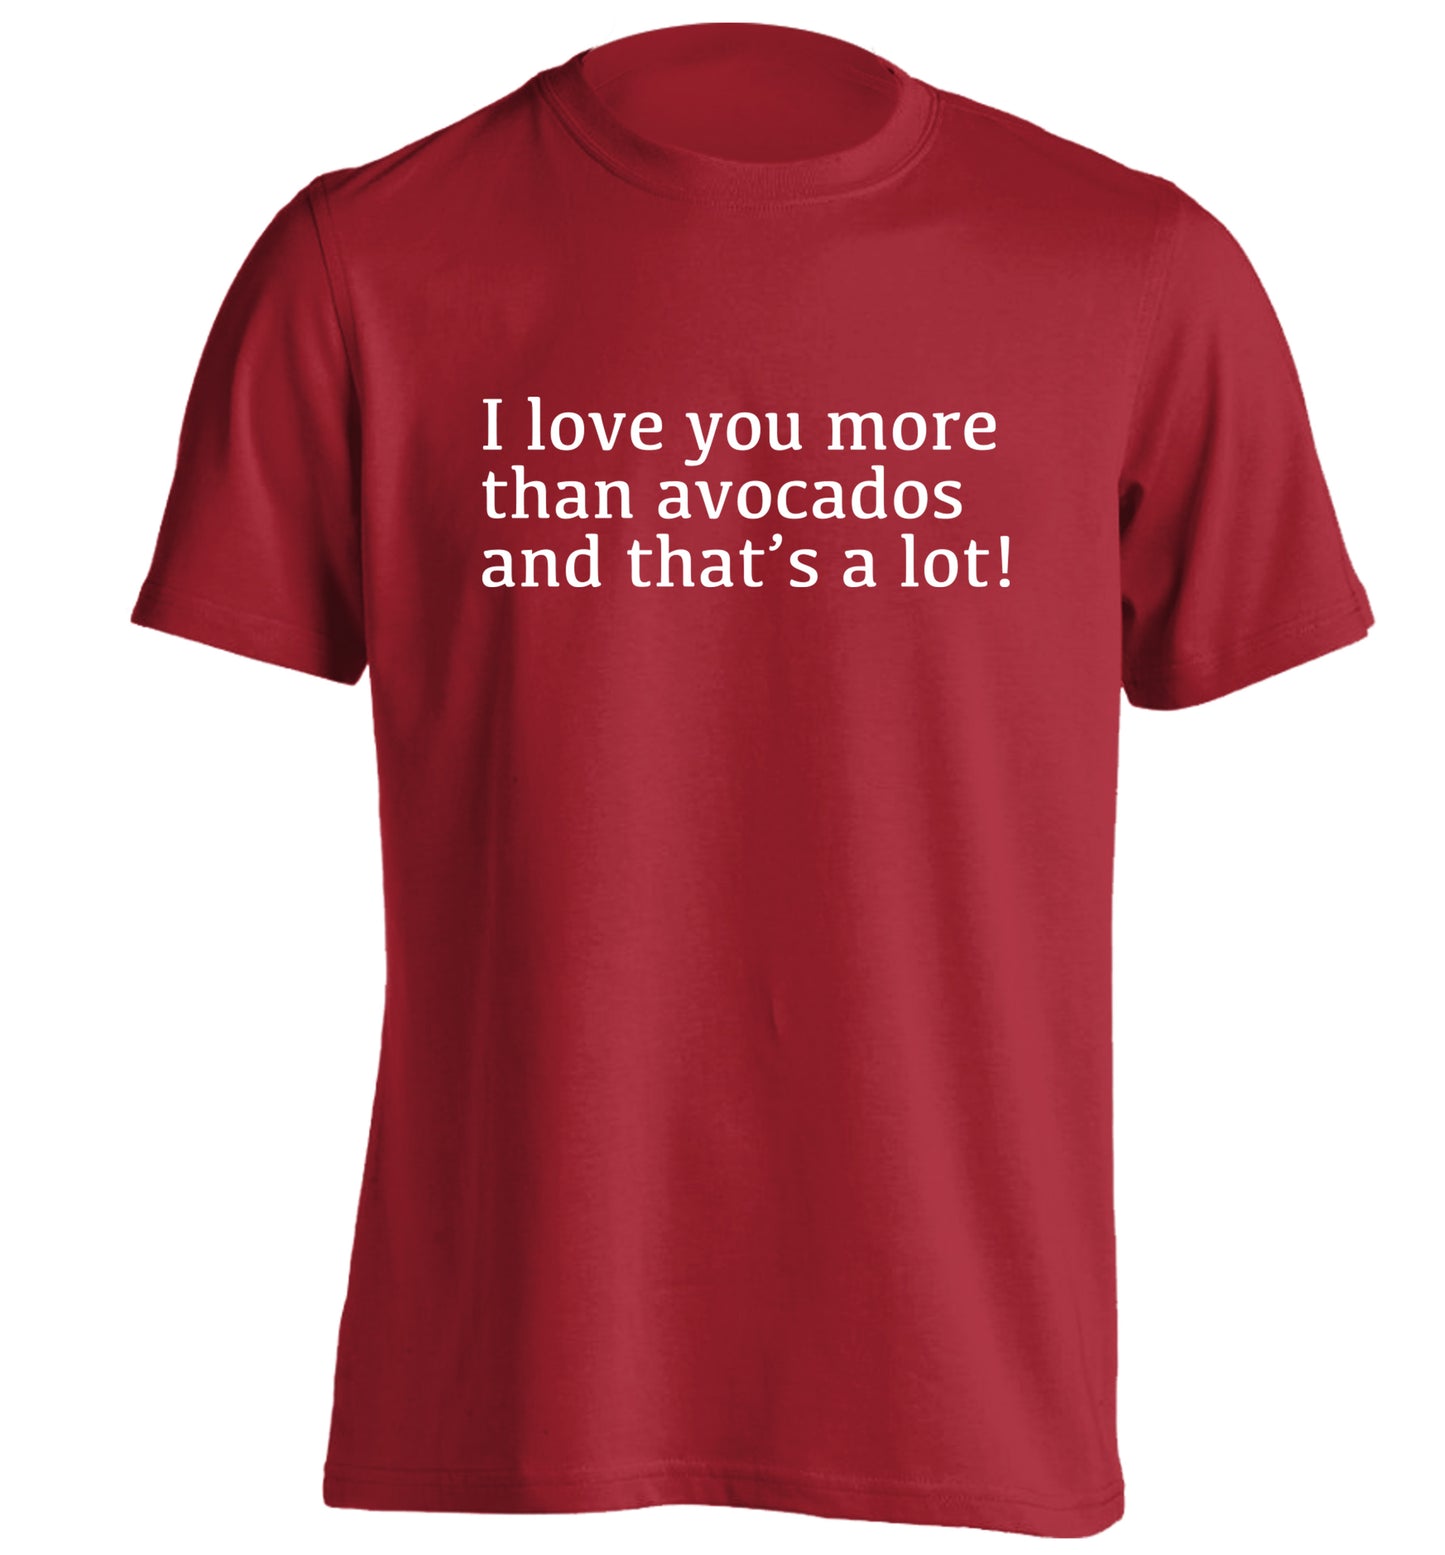 I love you more than avocados and that's a lot adults unisex red Tshirt 2XL